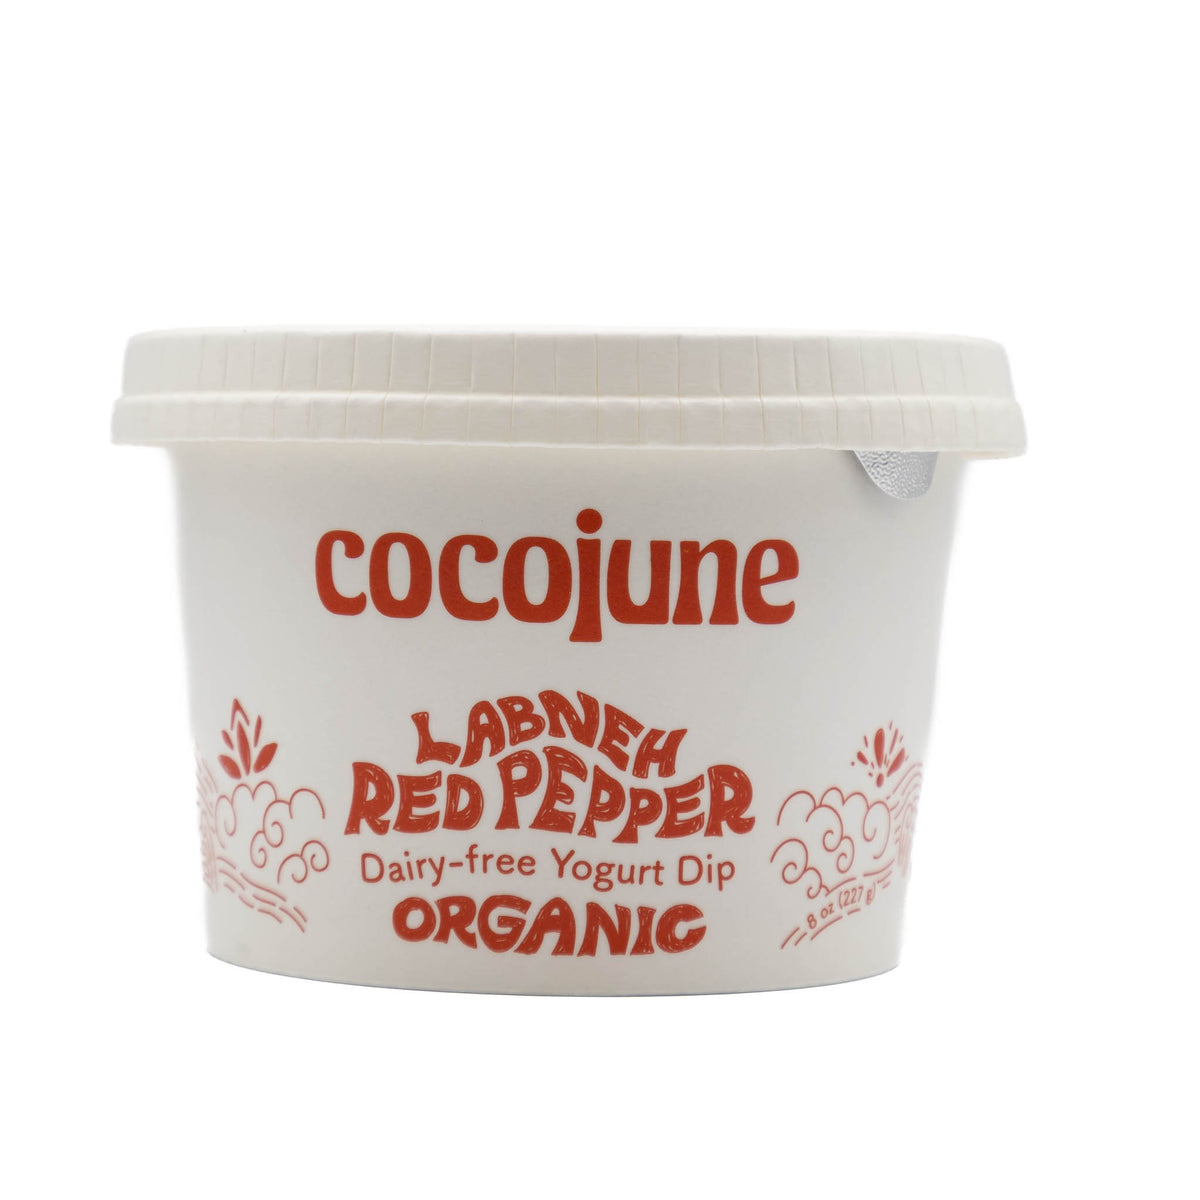 Cocojune Labneh Red Pepper